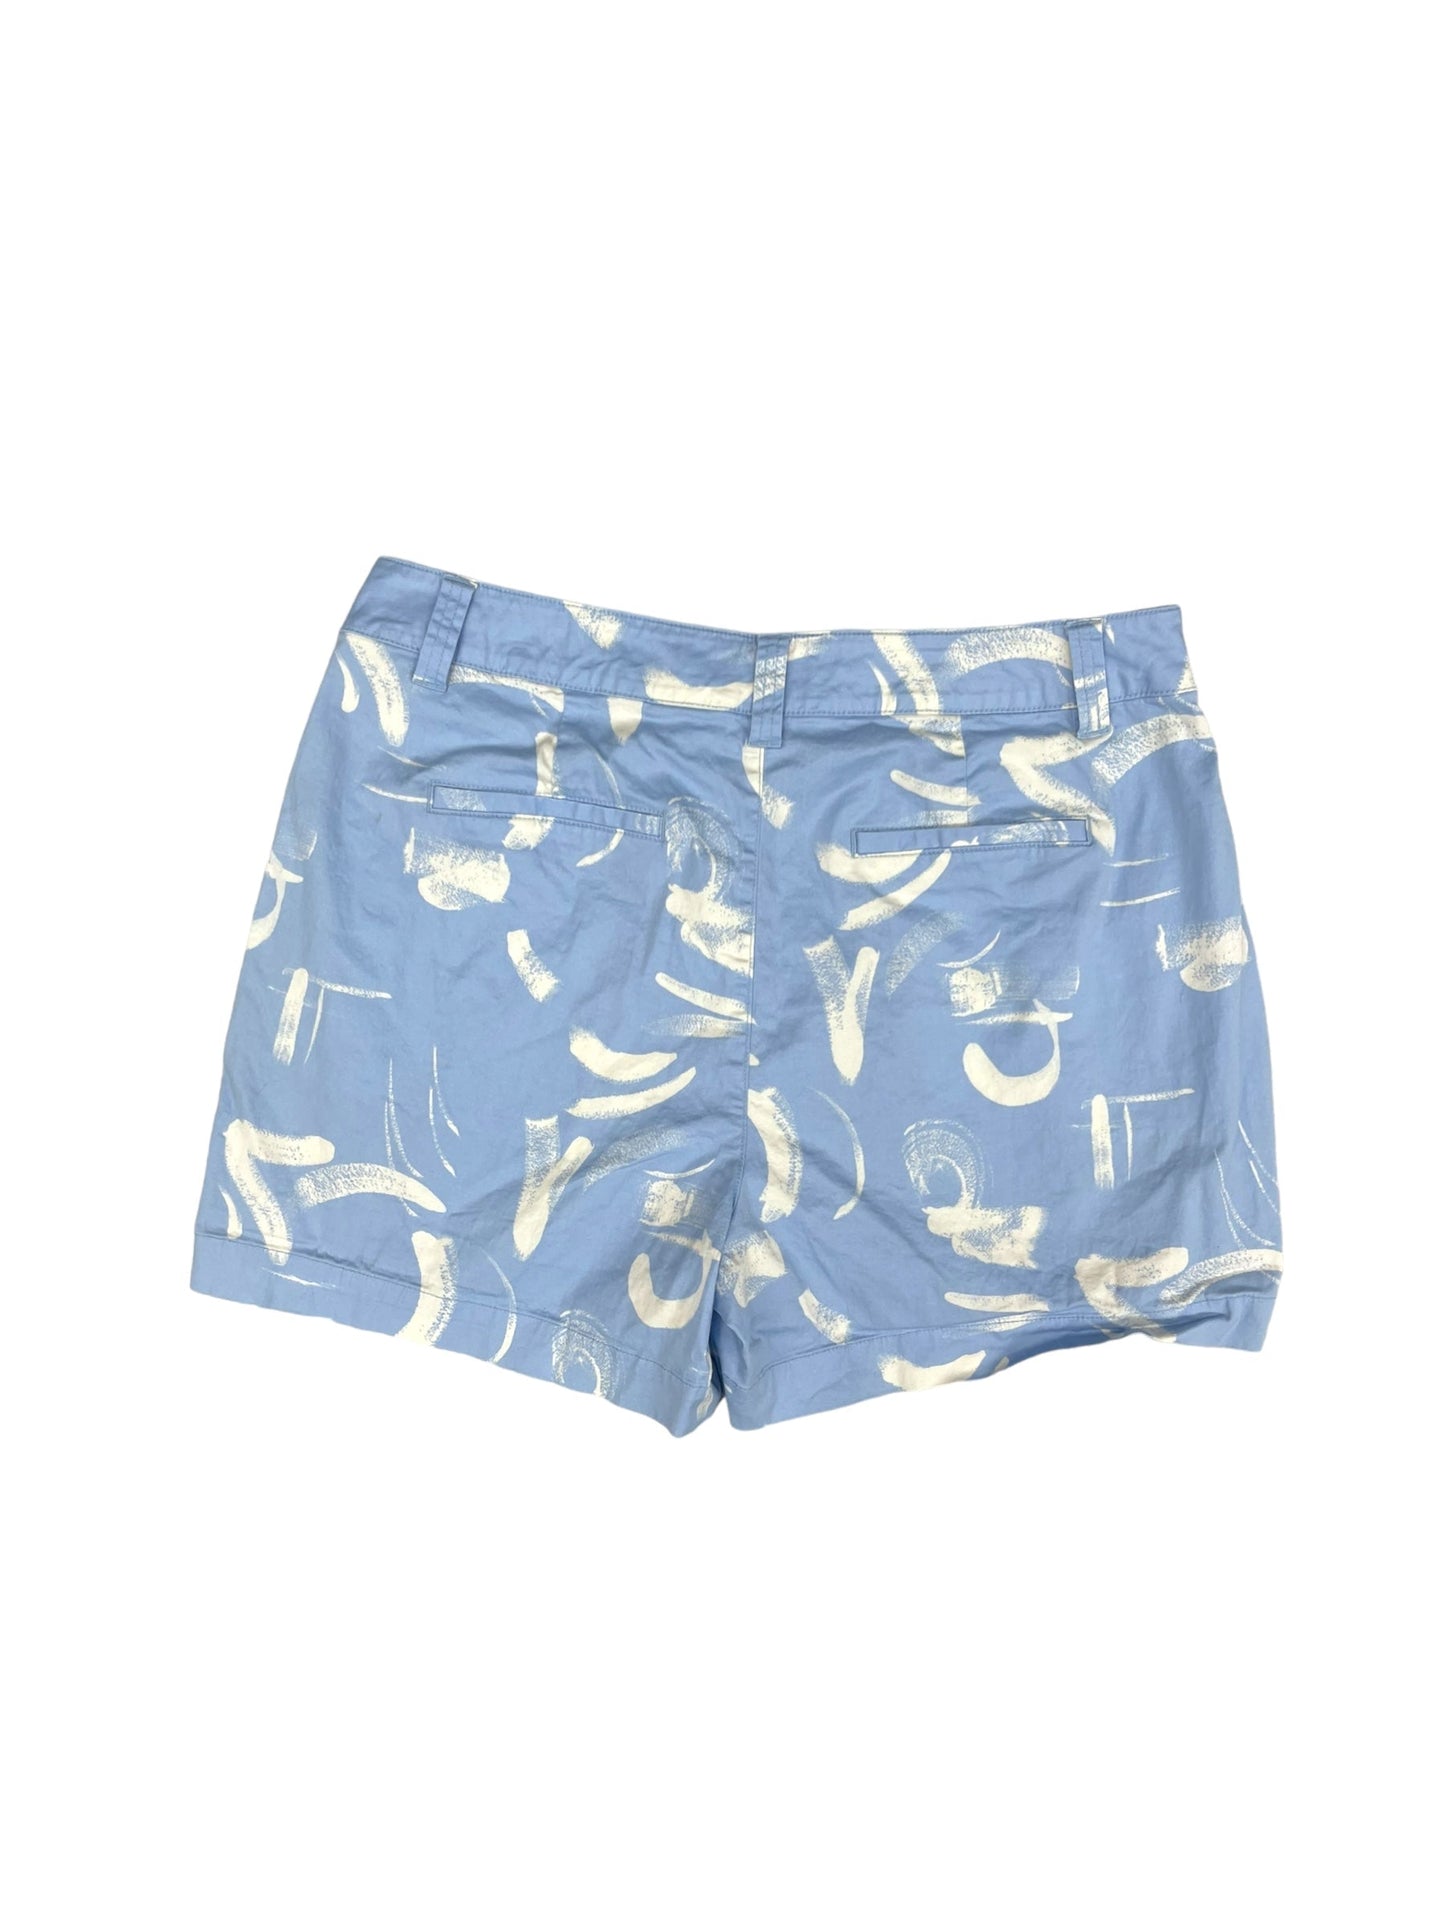 Blue & White Shorts A New Day, Size 14